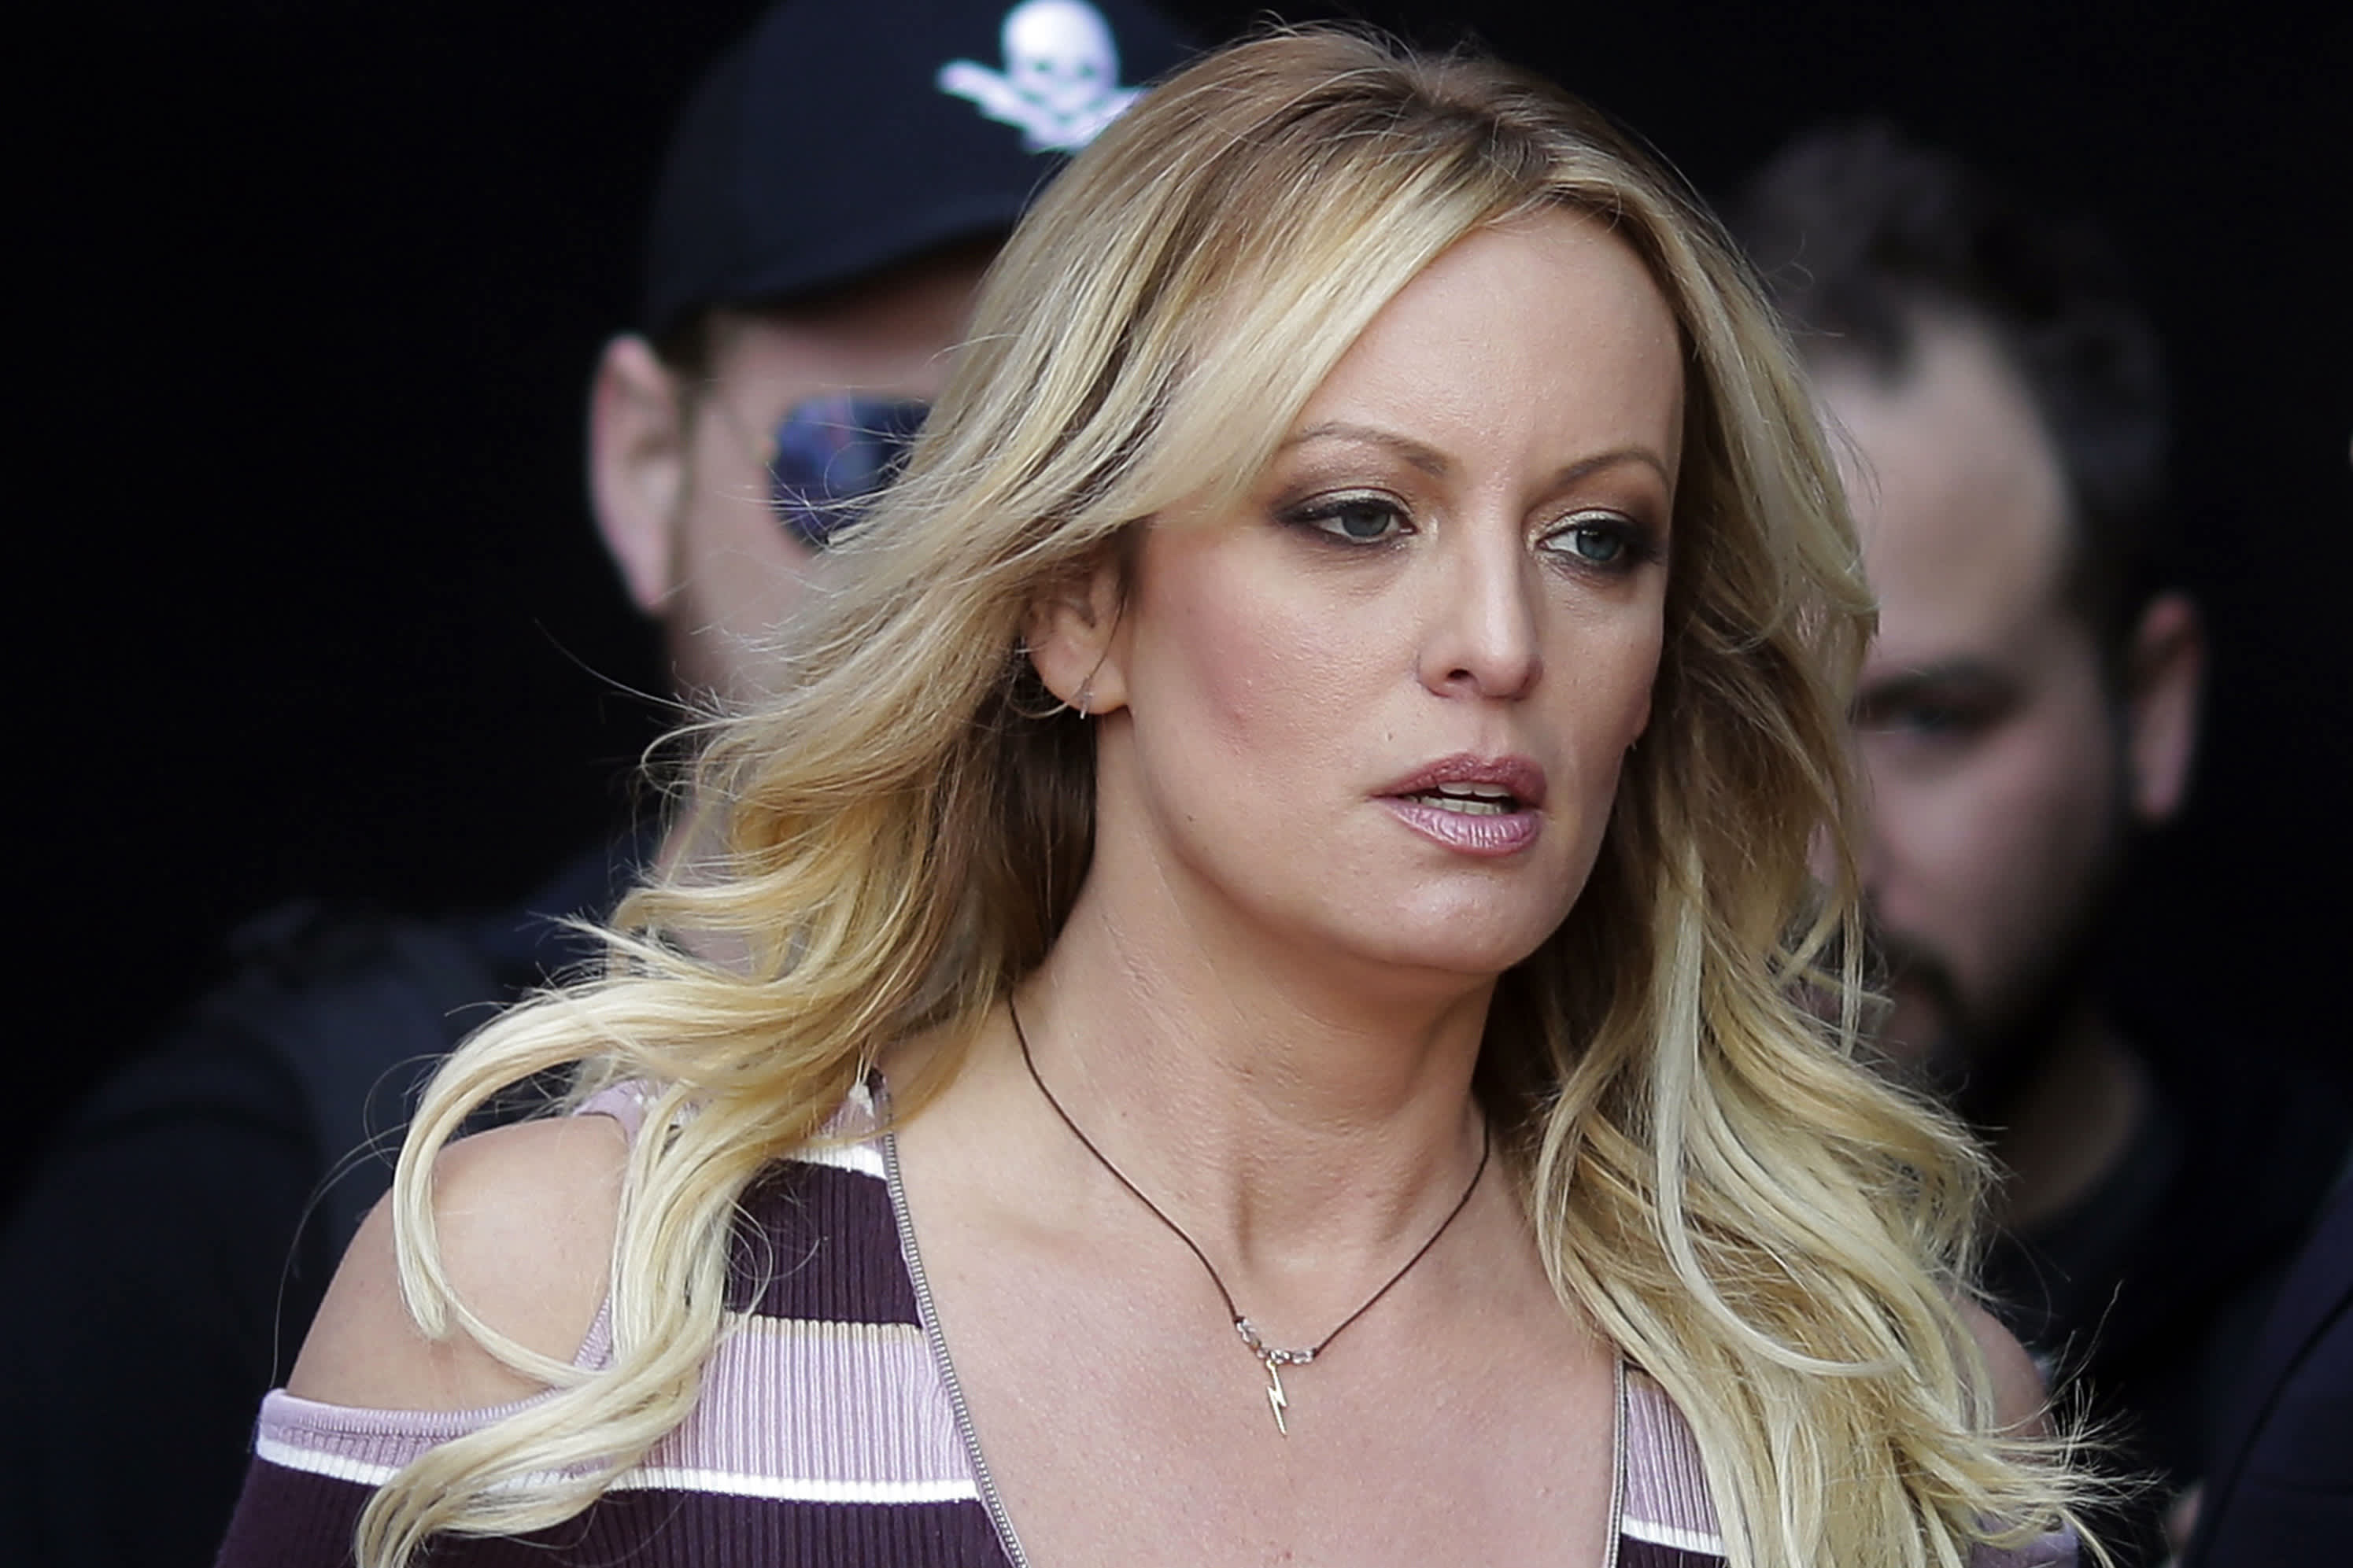 Hd Porn Sex Office Force Vedios - Trump probe: Porn star Stormy Daniels says she'll dance if he's jailed